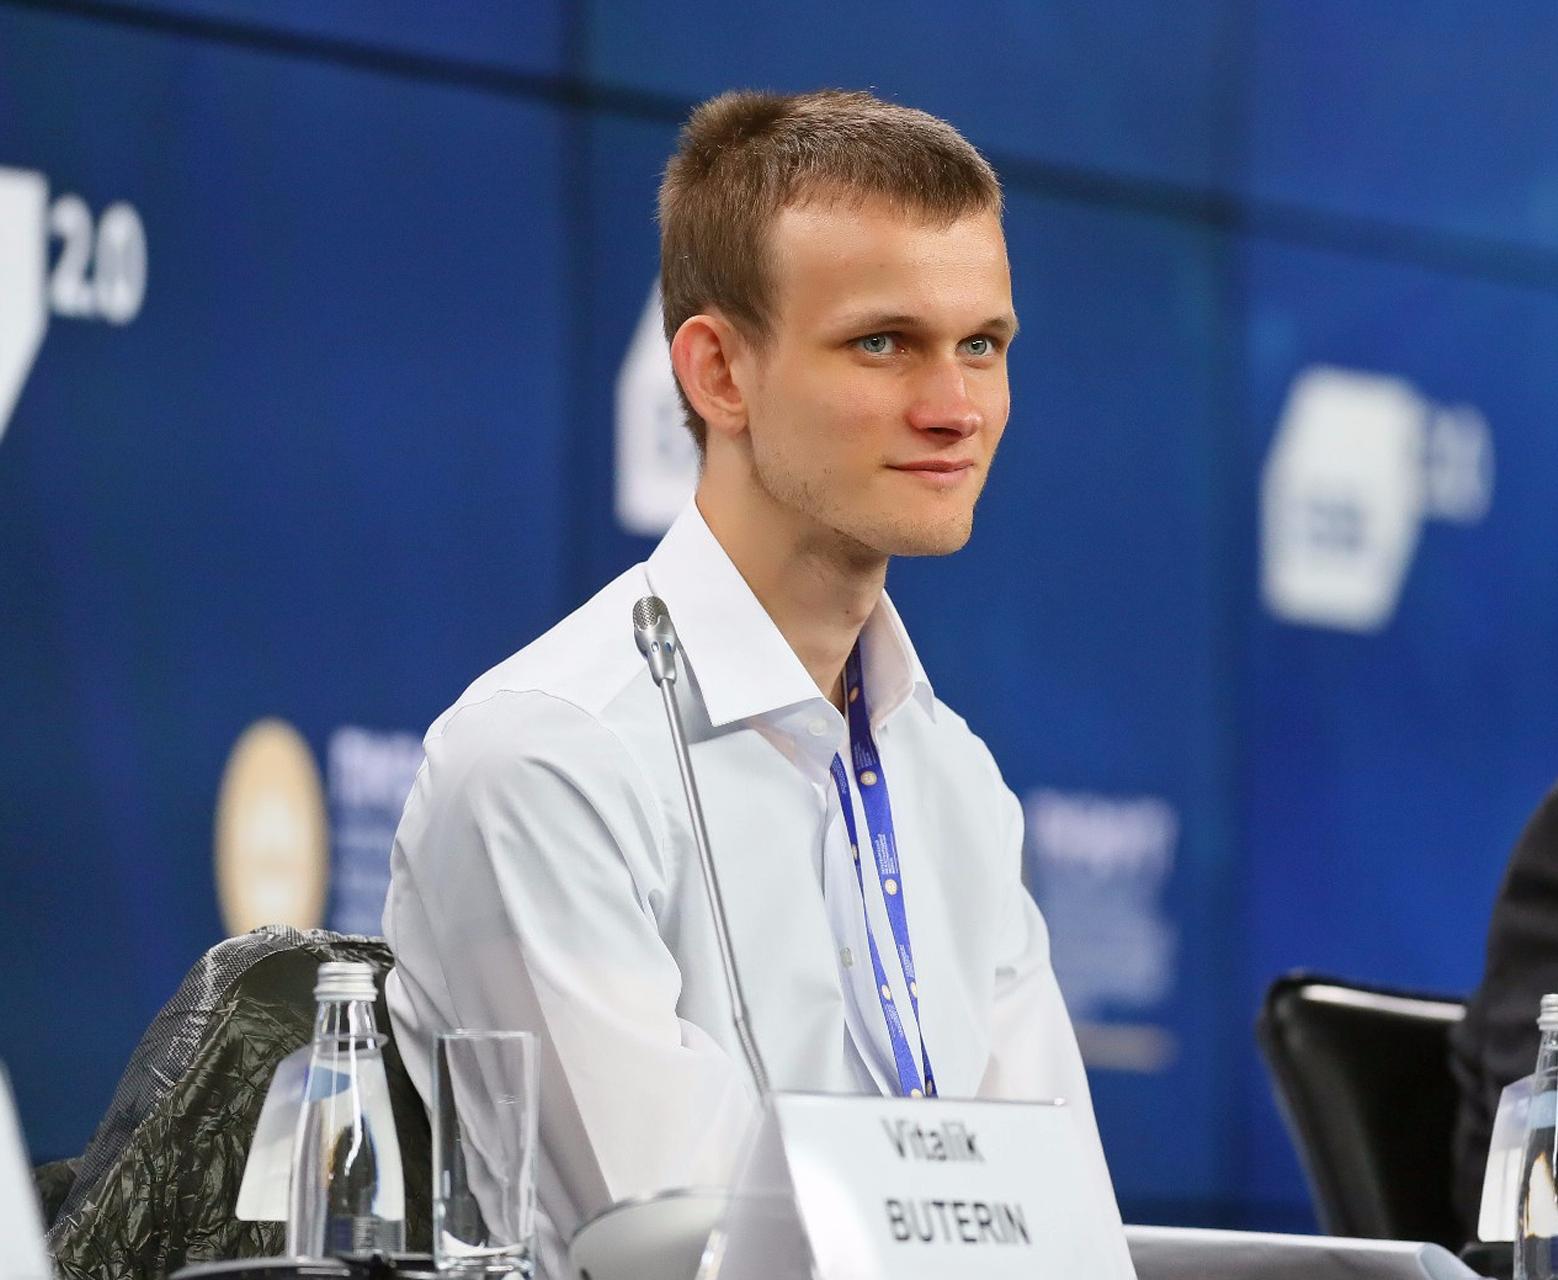 Meeting with founder of Ethereum project Vitalik Buterin